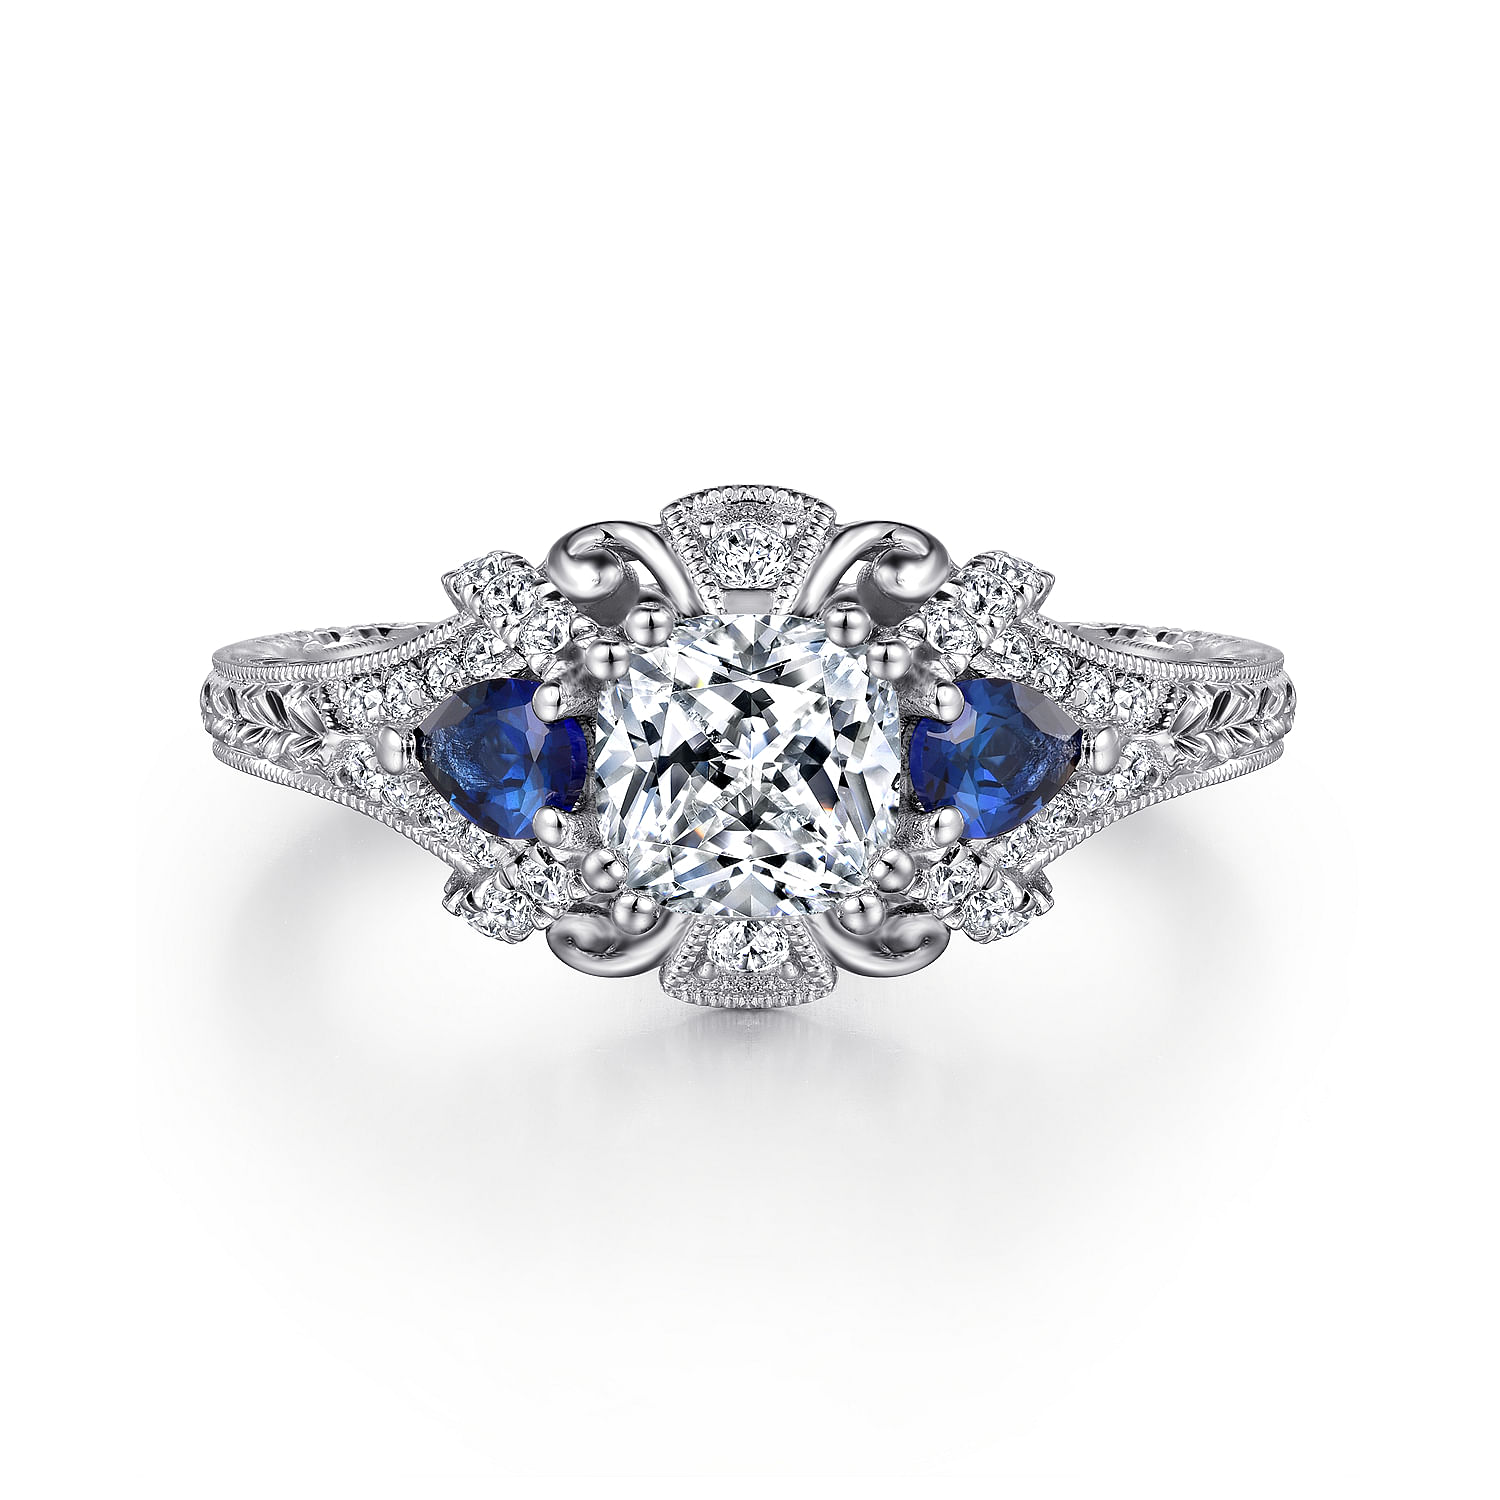 Chrystie - 14K White Gold Cushion Cut Sapphire and Diamond Engagement Ring